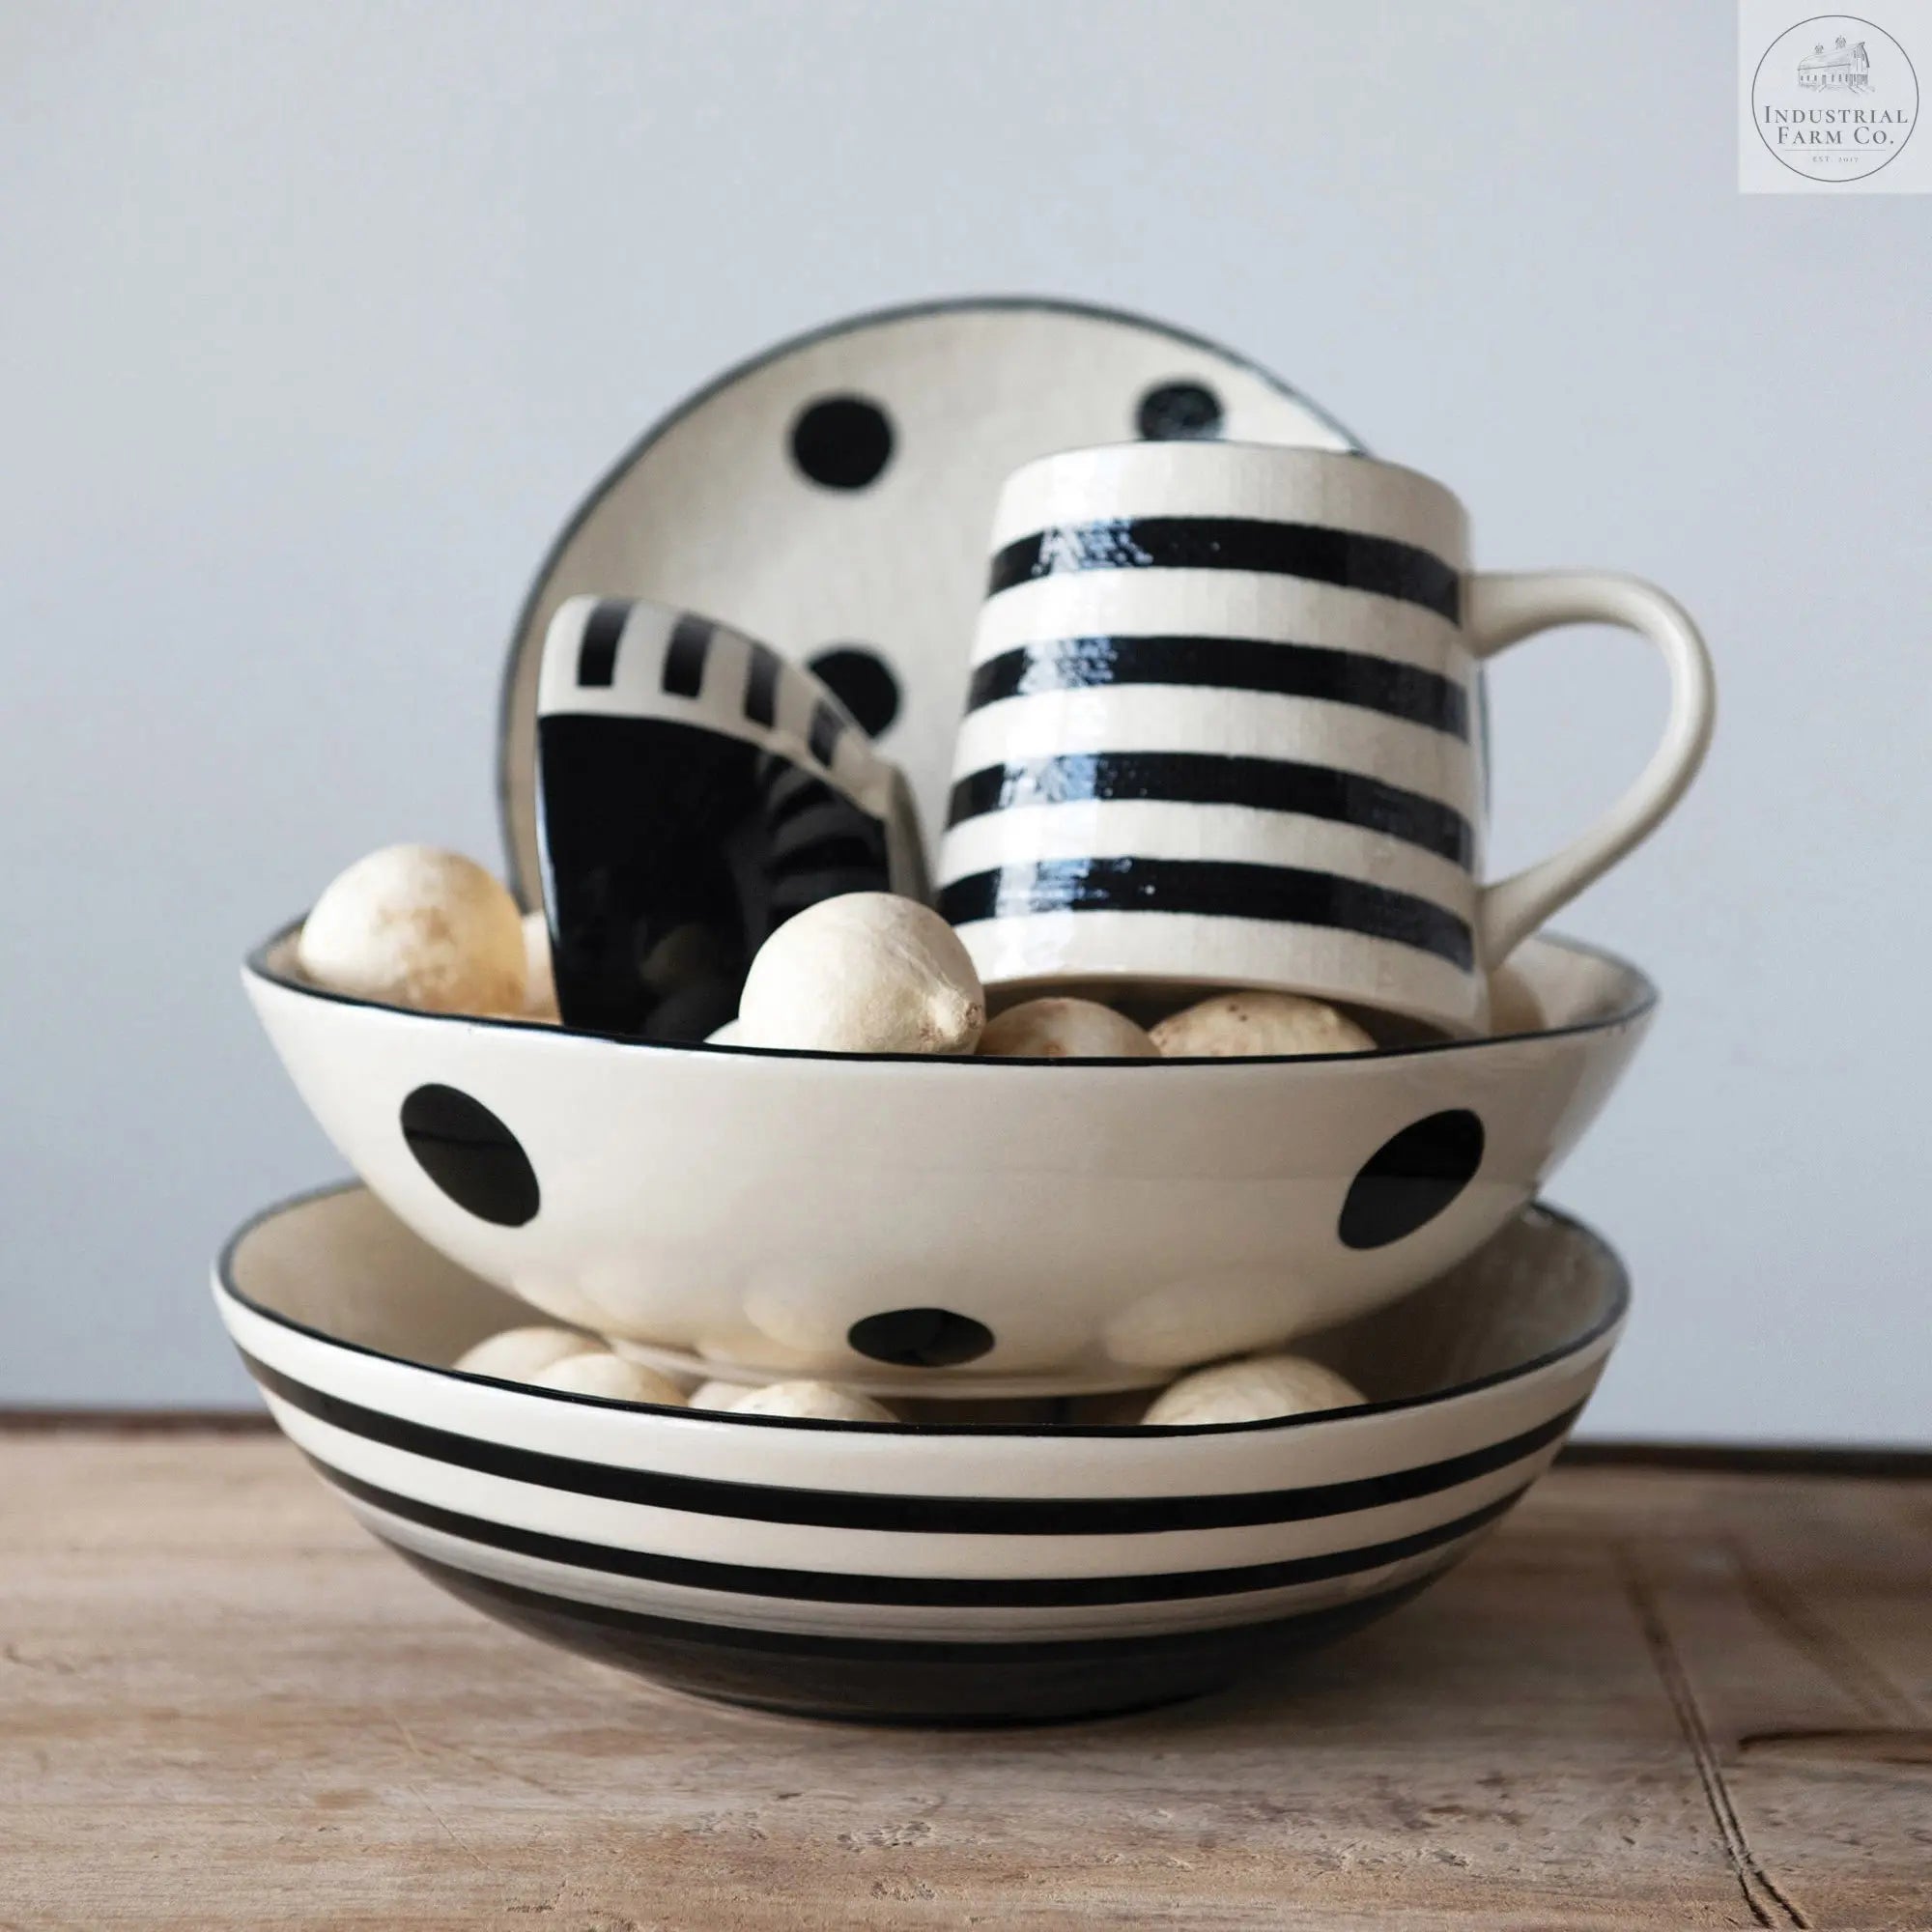 The Walker Hand Painted Bowl     | Industrial Farm Co